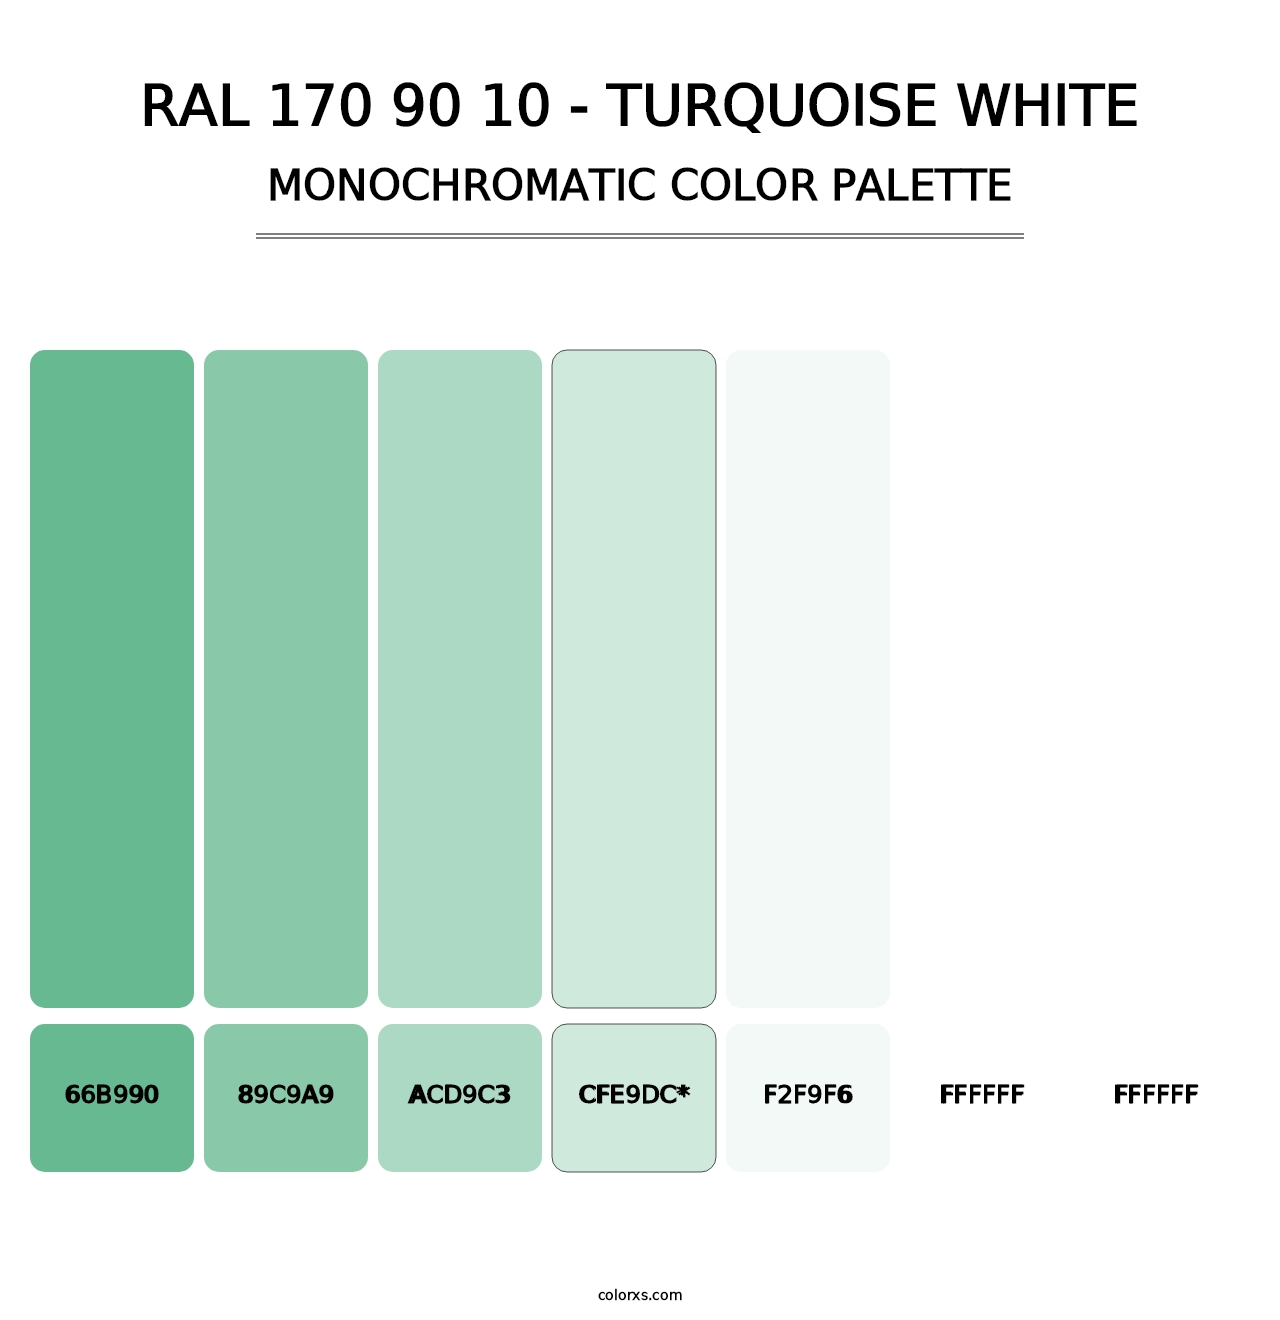 RAL 170 90 10 - Turquoise White - Monochromatic Color Palette